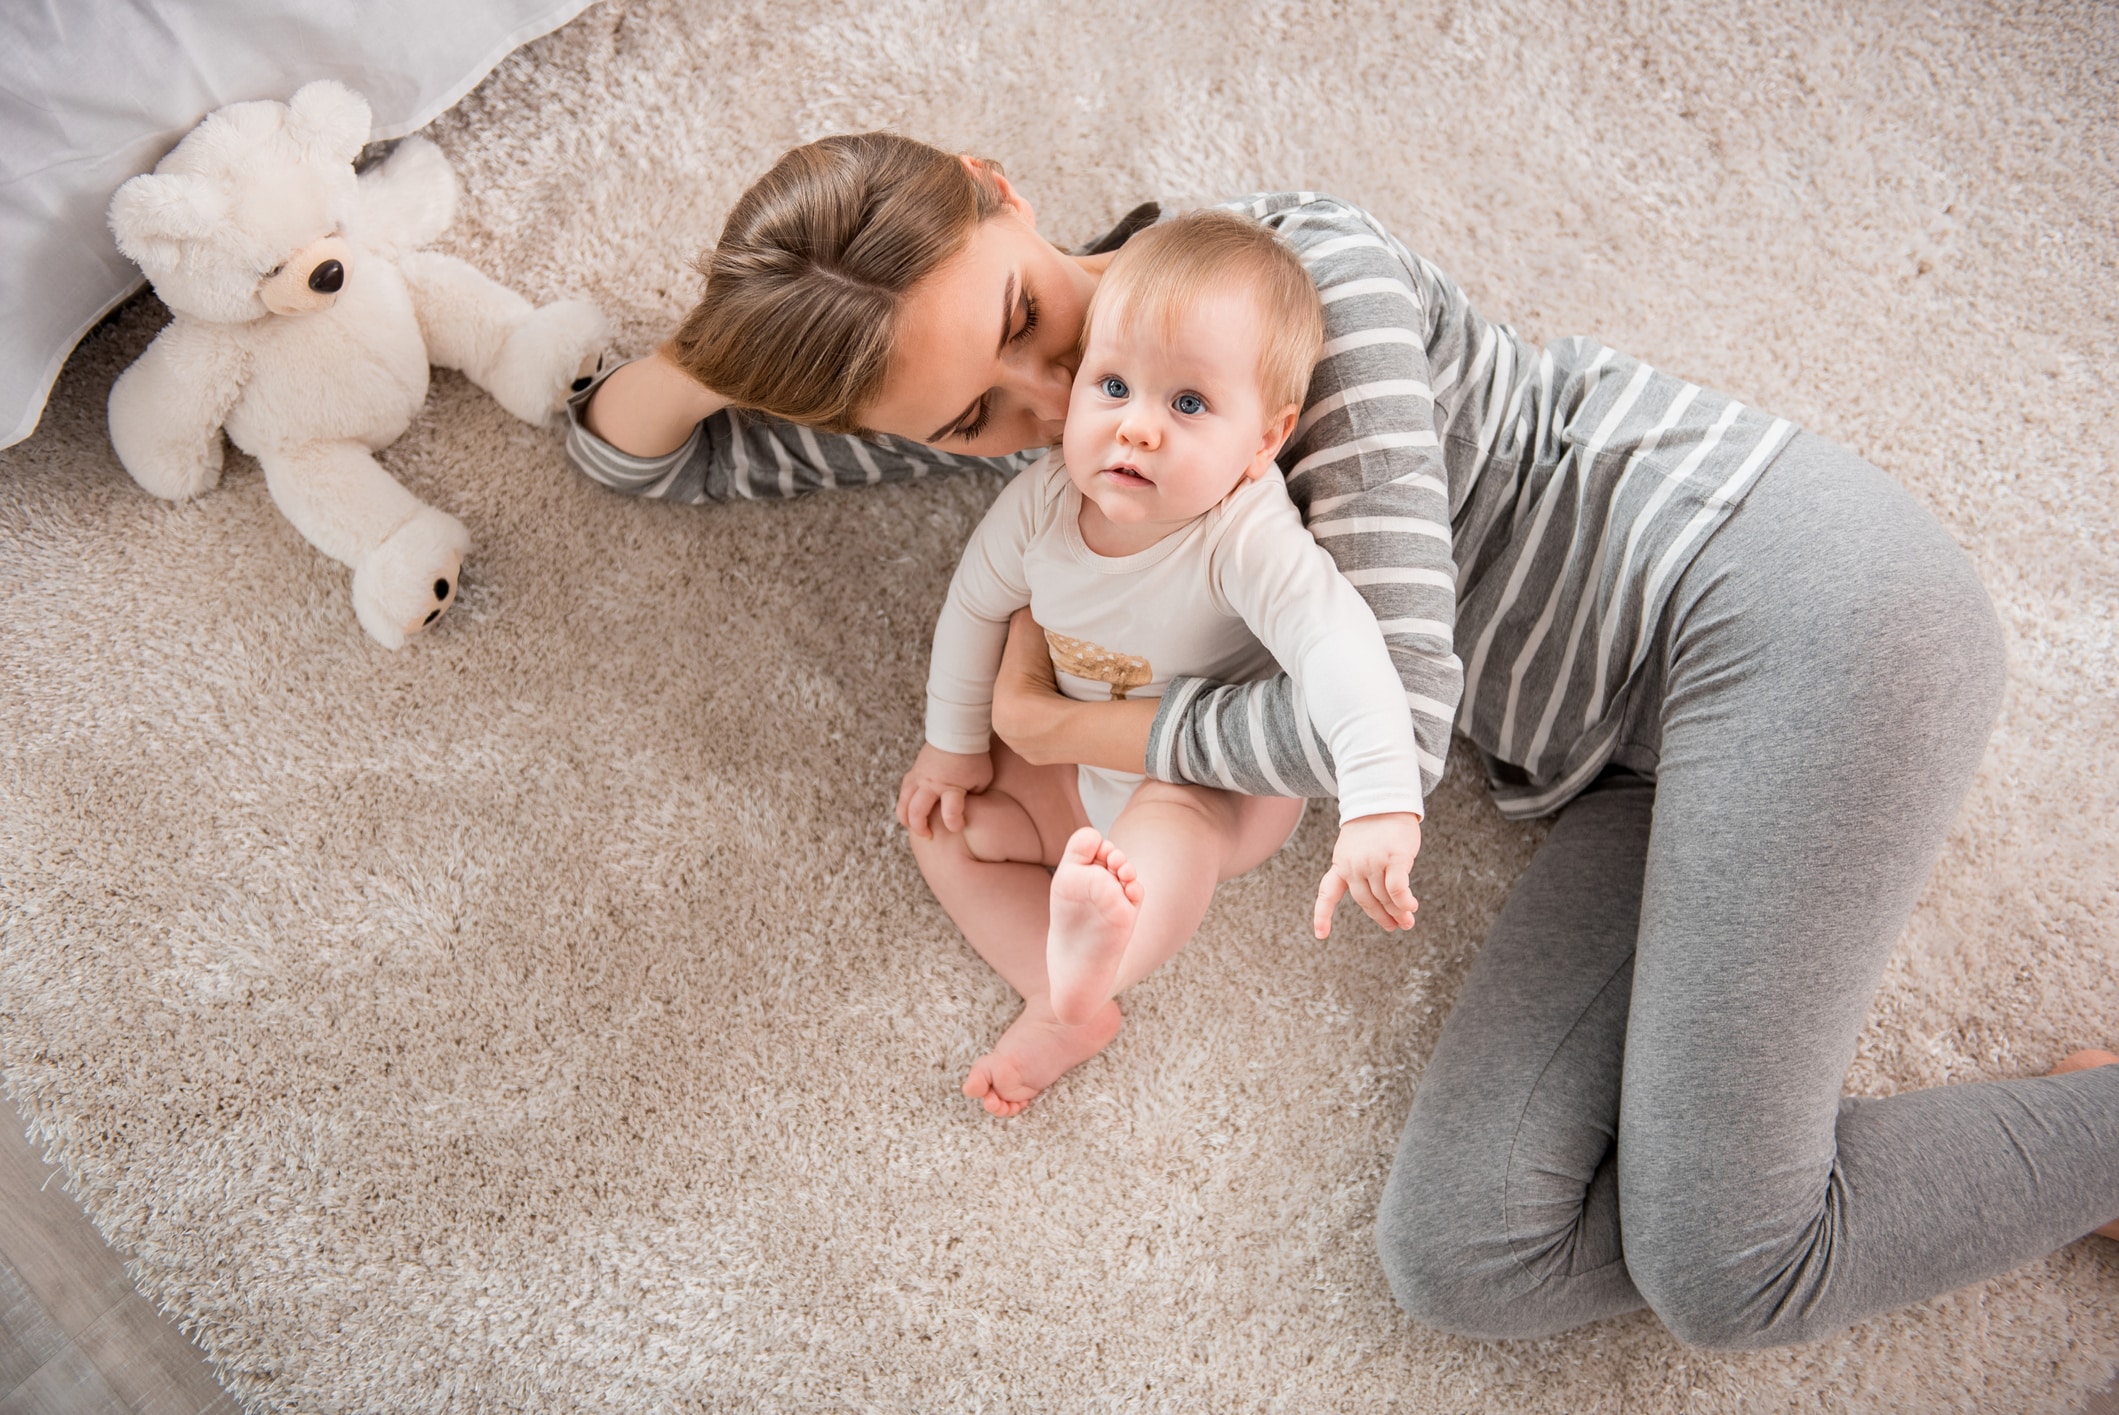 Baby Concussion Signs And What To Do, Baby Fell On Head Hardwood Floor